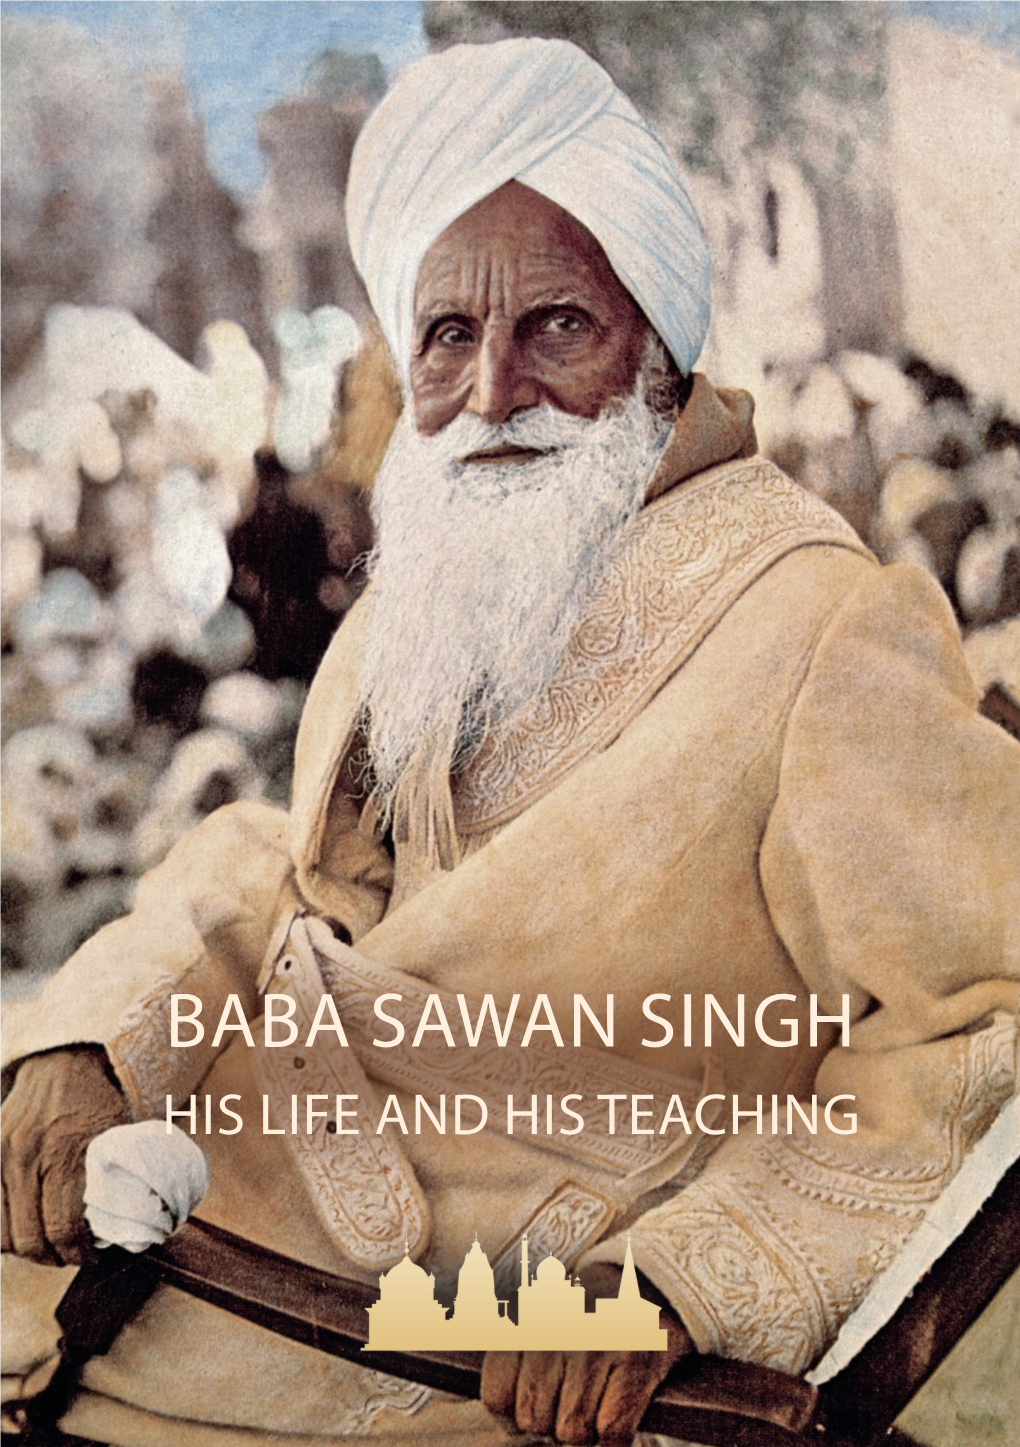 Baba Sawan Singh His LIFE and His TEACHING Second Edition: 2019 © 2019 - Edited By: UNITY of MAN – Sant Kirpal Singh Steinklüftstraße 34 5340 St